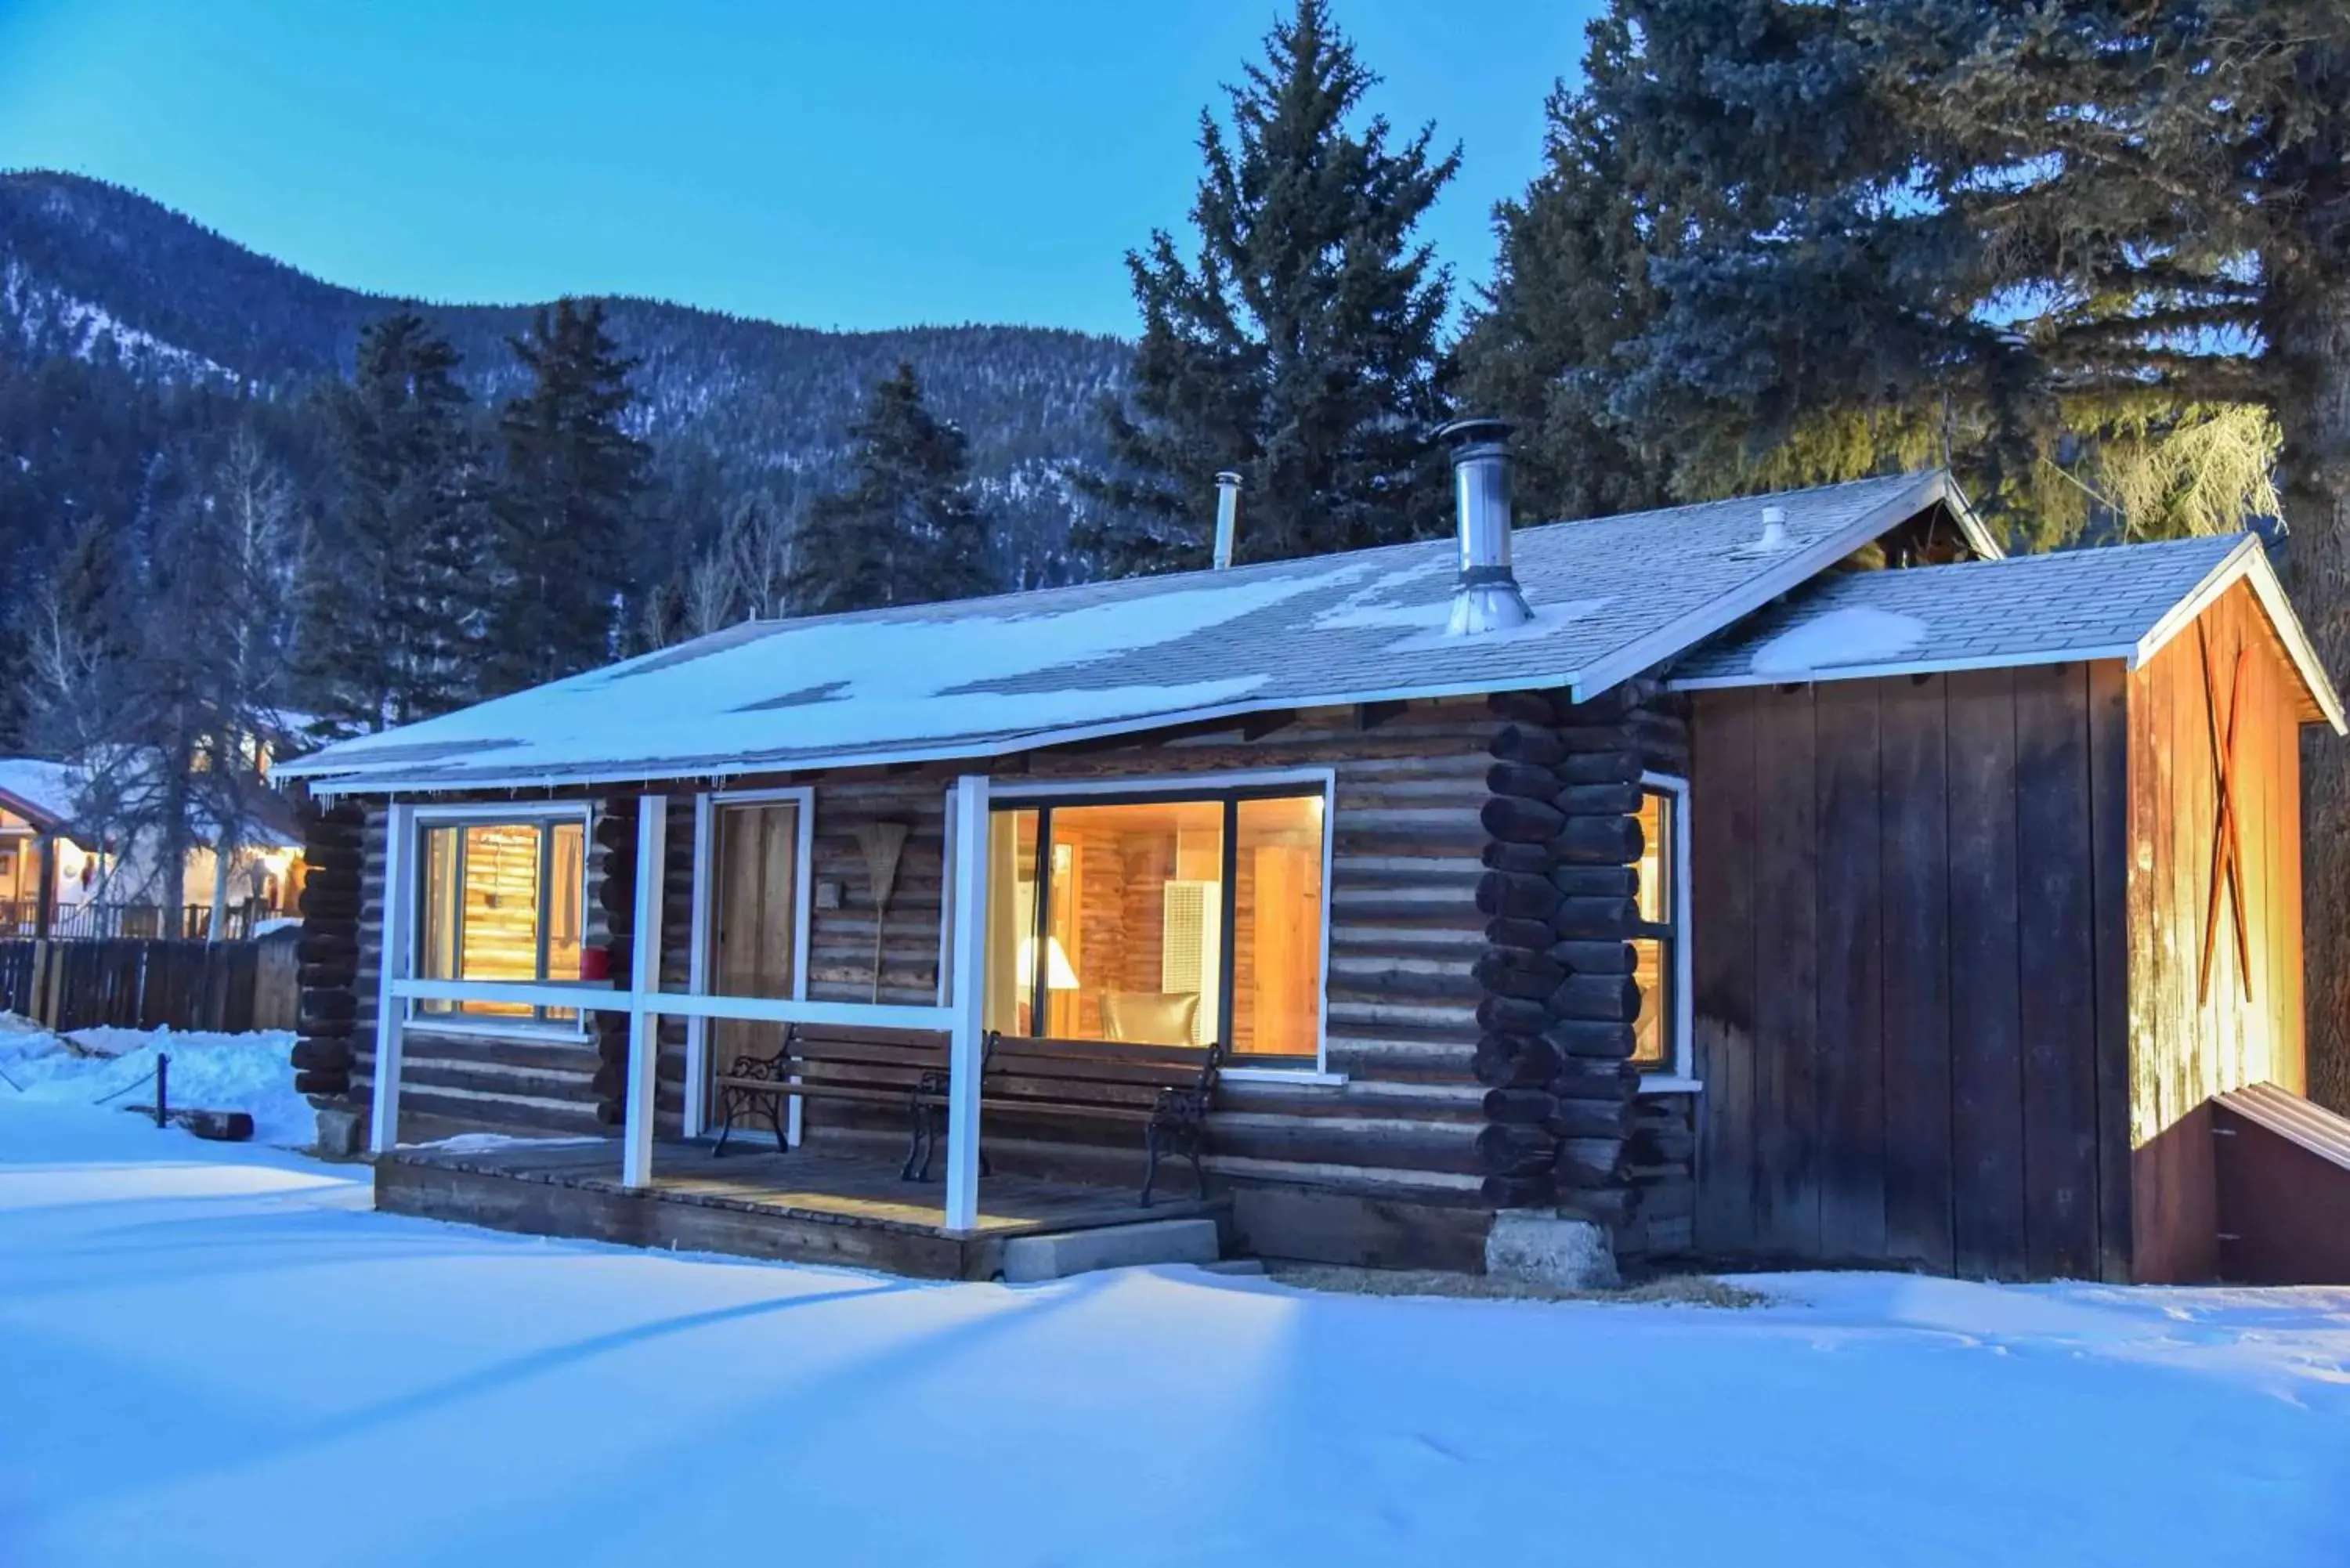 Property building, Winter in Alpine Lodge Red River